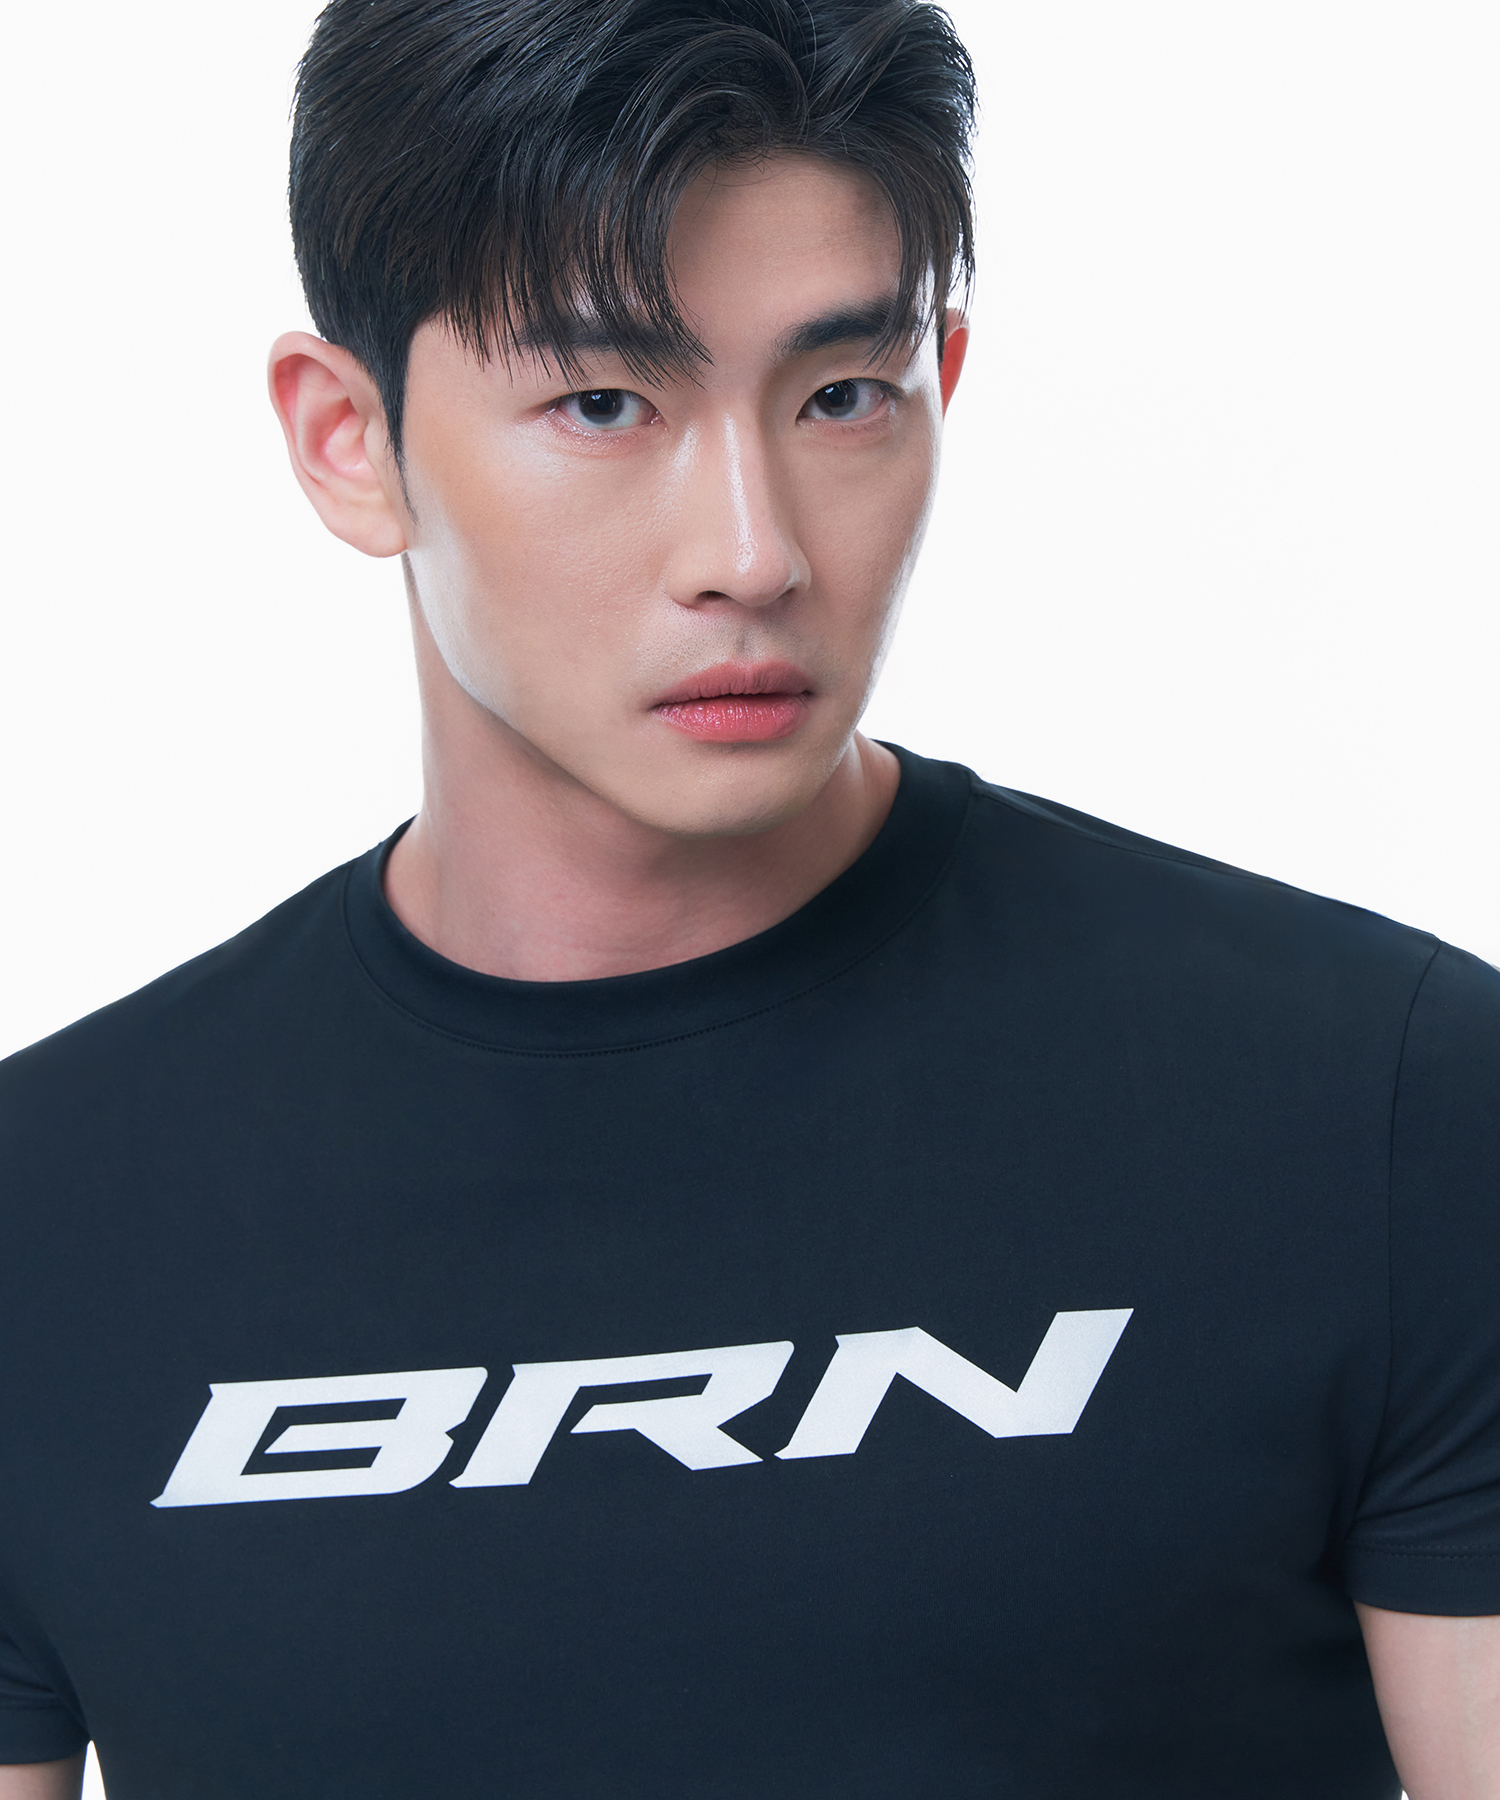 BRN REFLECTIVE MUSCLE FIT T-SHIRTS [BLACK]